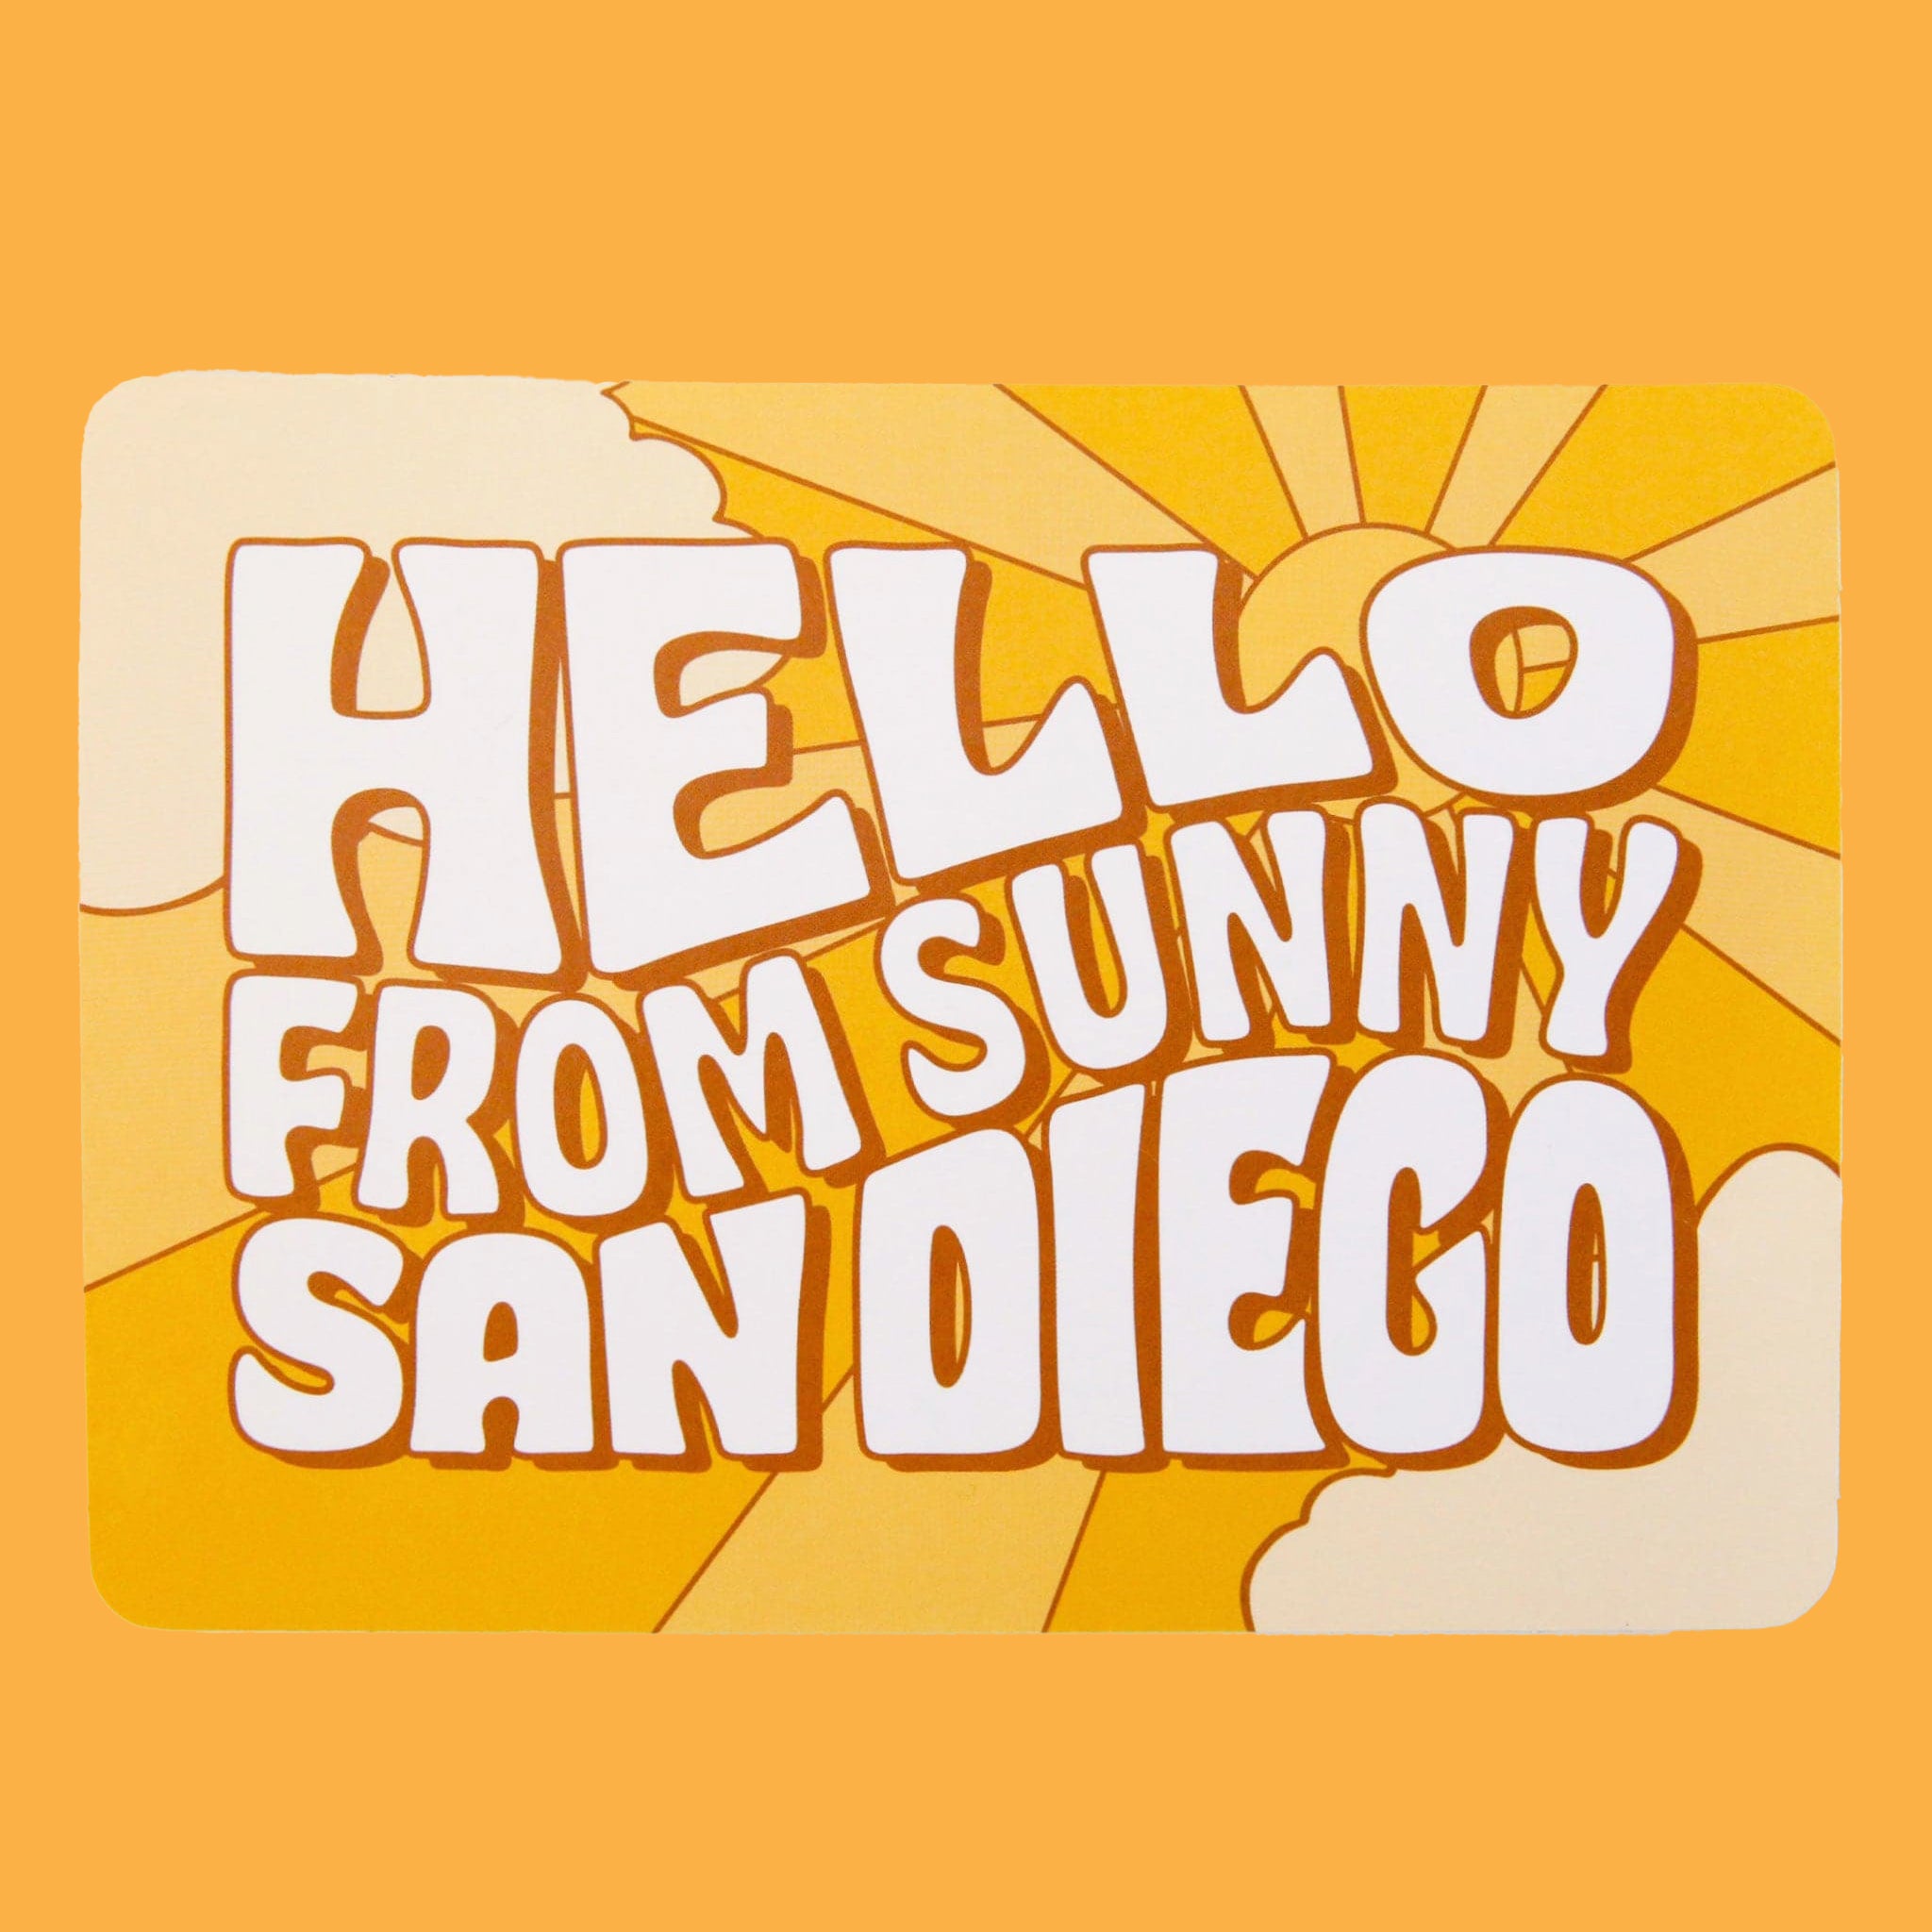 On a yellow background is a yellow postcard with a sun and sunray illustration along with text in the center that reads, "Hello From Sunny San Diego" in cream letters.